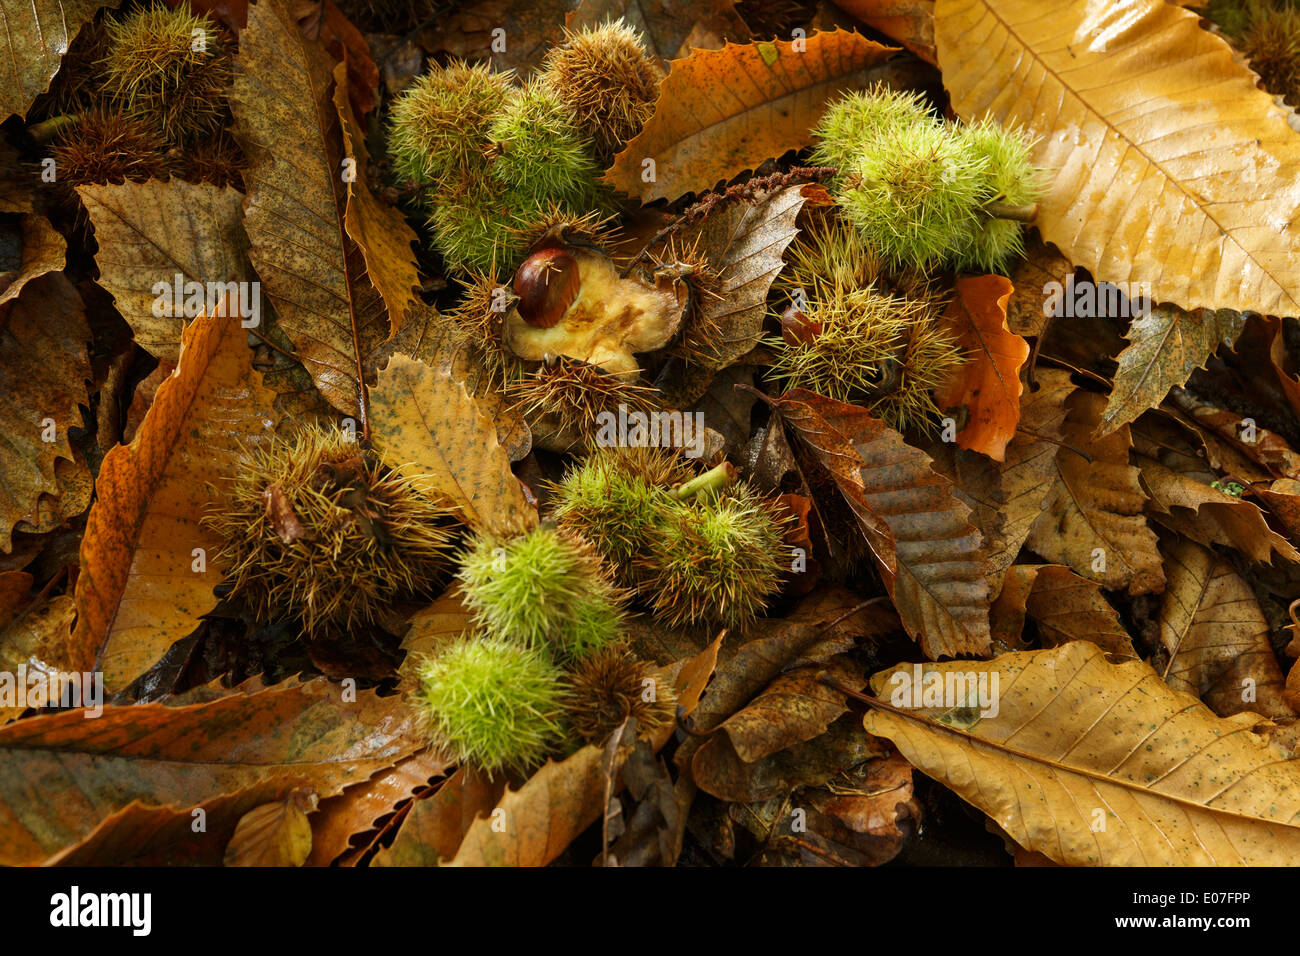 Sweet chestnut Castanea sativa, leaves and seed cases, Brownsea Island, Dorset, UK in October. Stock Photo